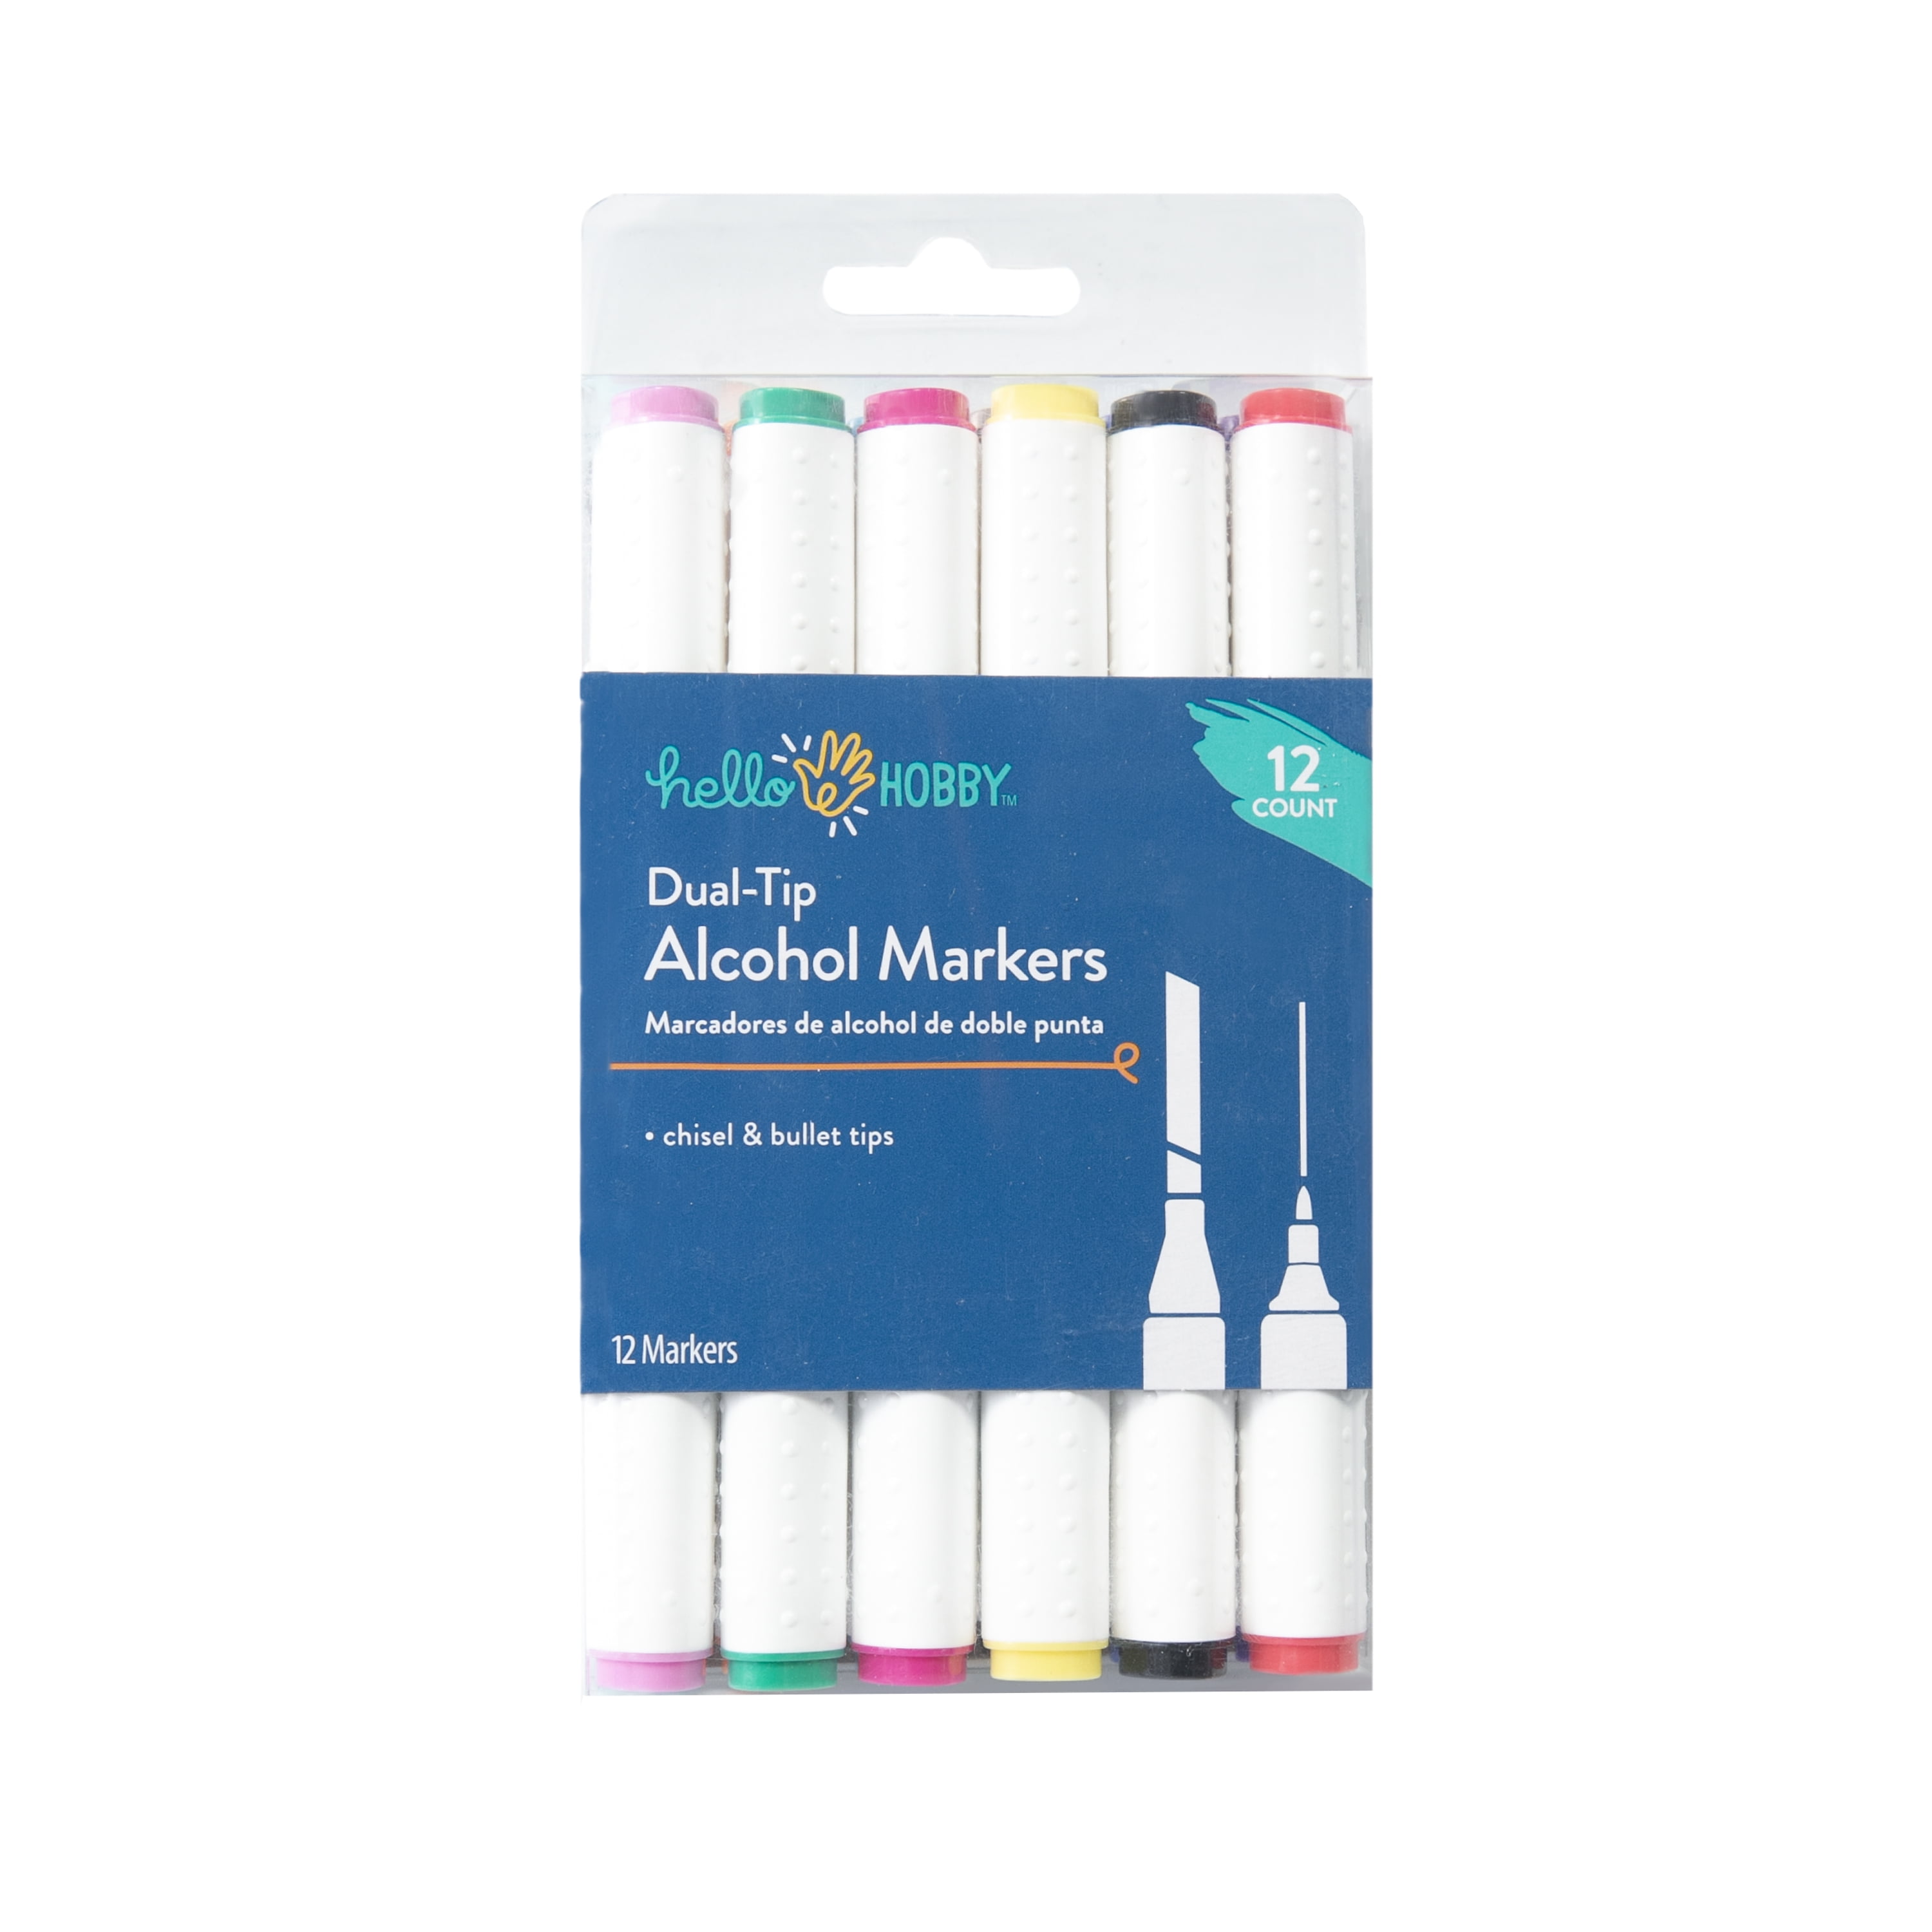 Twin Tip Fineline Markers - 30 Piece Set, Hobby Lobby